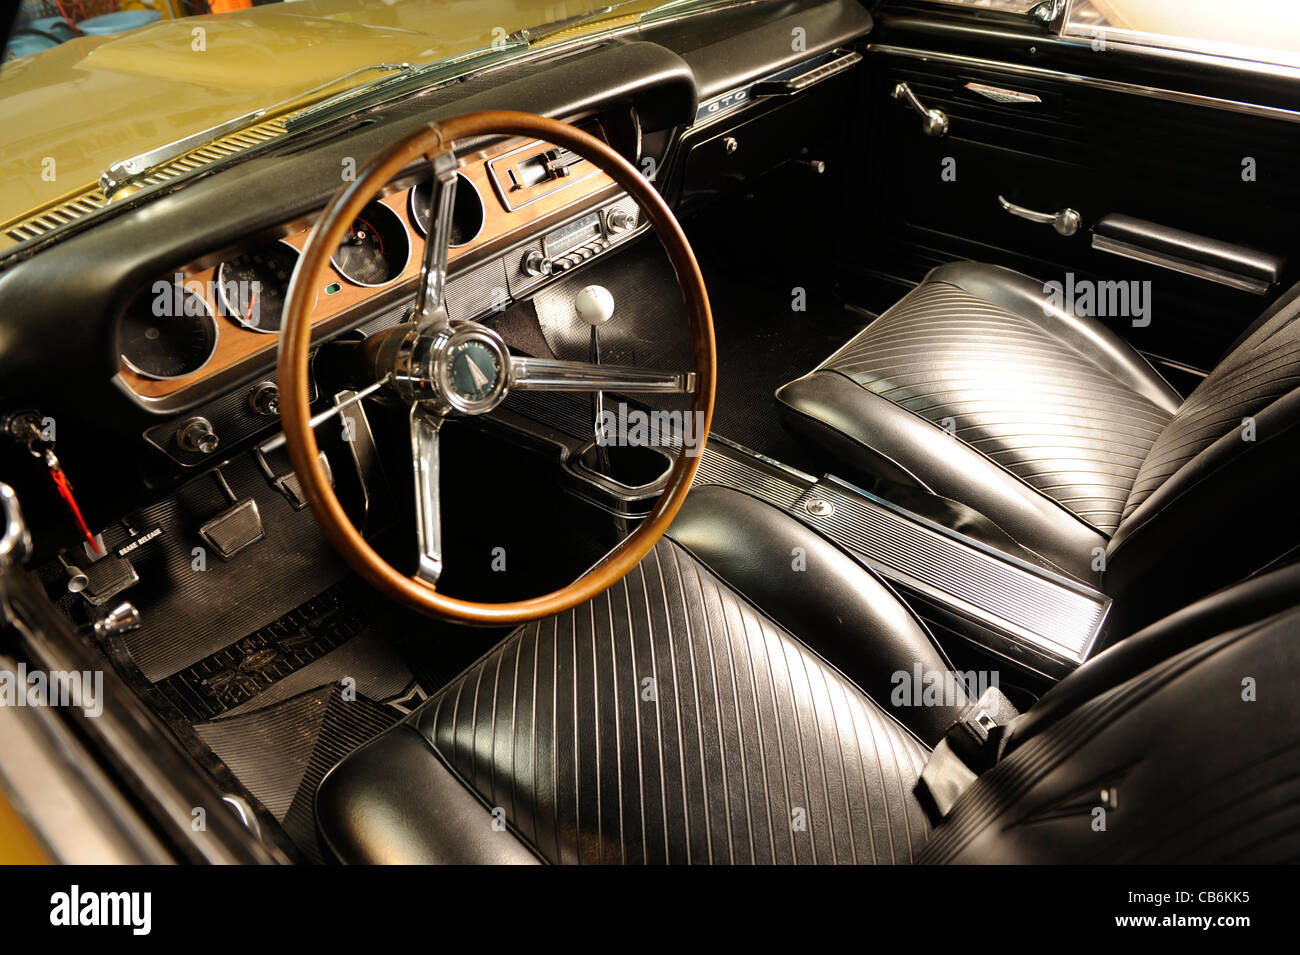 1965 Pontiac Gto 2 Door Hrd Top Gold Tiger Edition Hurst Equipped Muscle Car Hot Rod Stock Photo Alamy